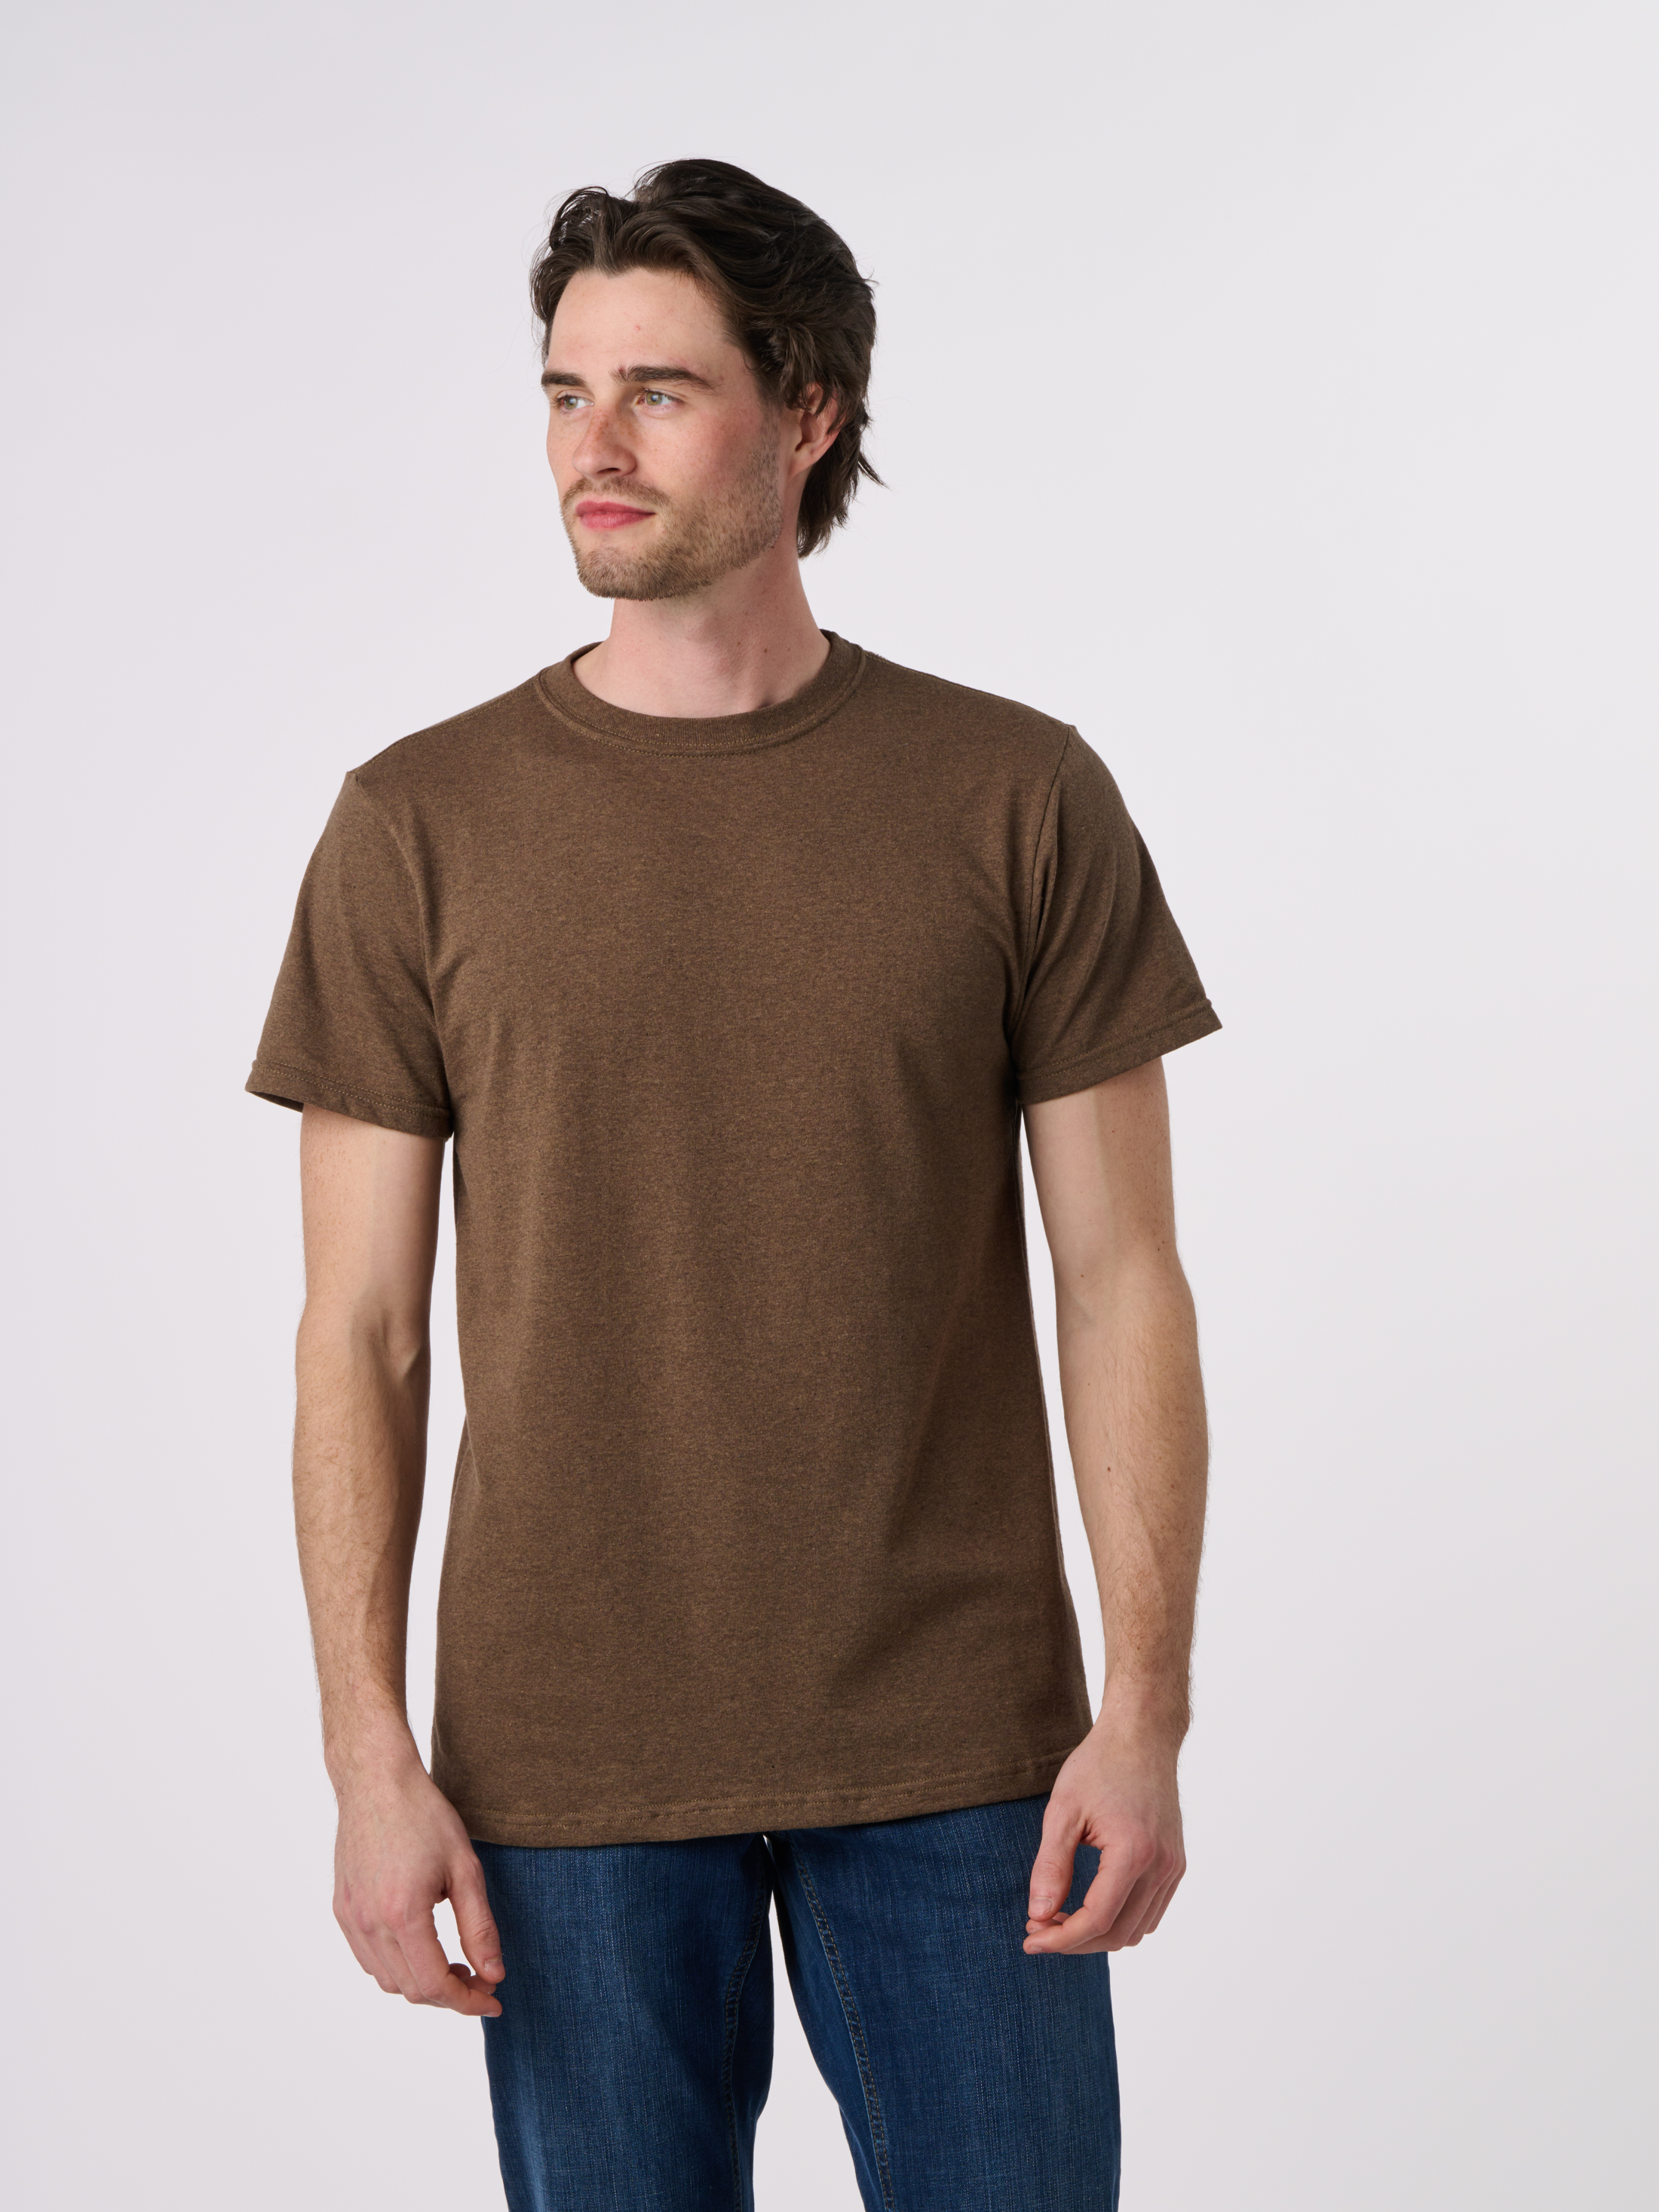 RECOVER_RS100_CLASSICSHORTSLEEVETSHIRT_BETTERBROWN_FRONT.png